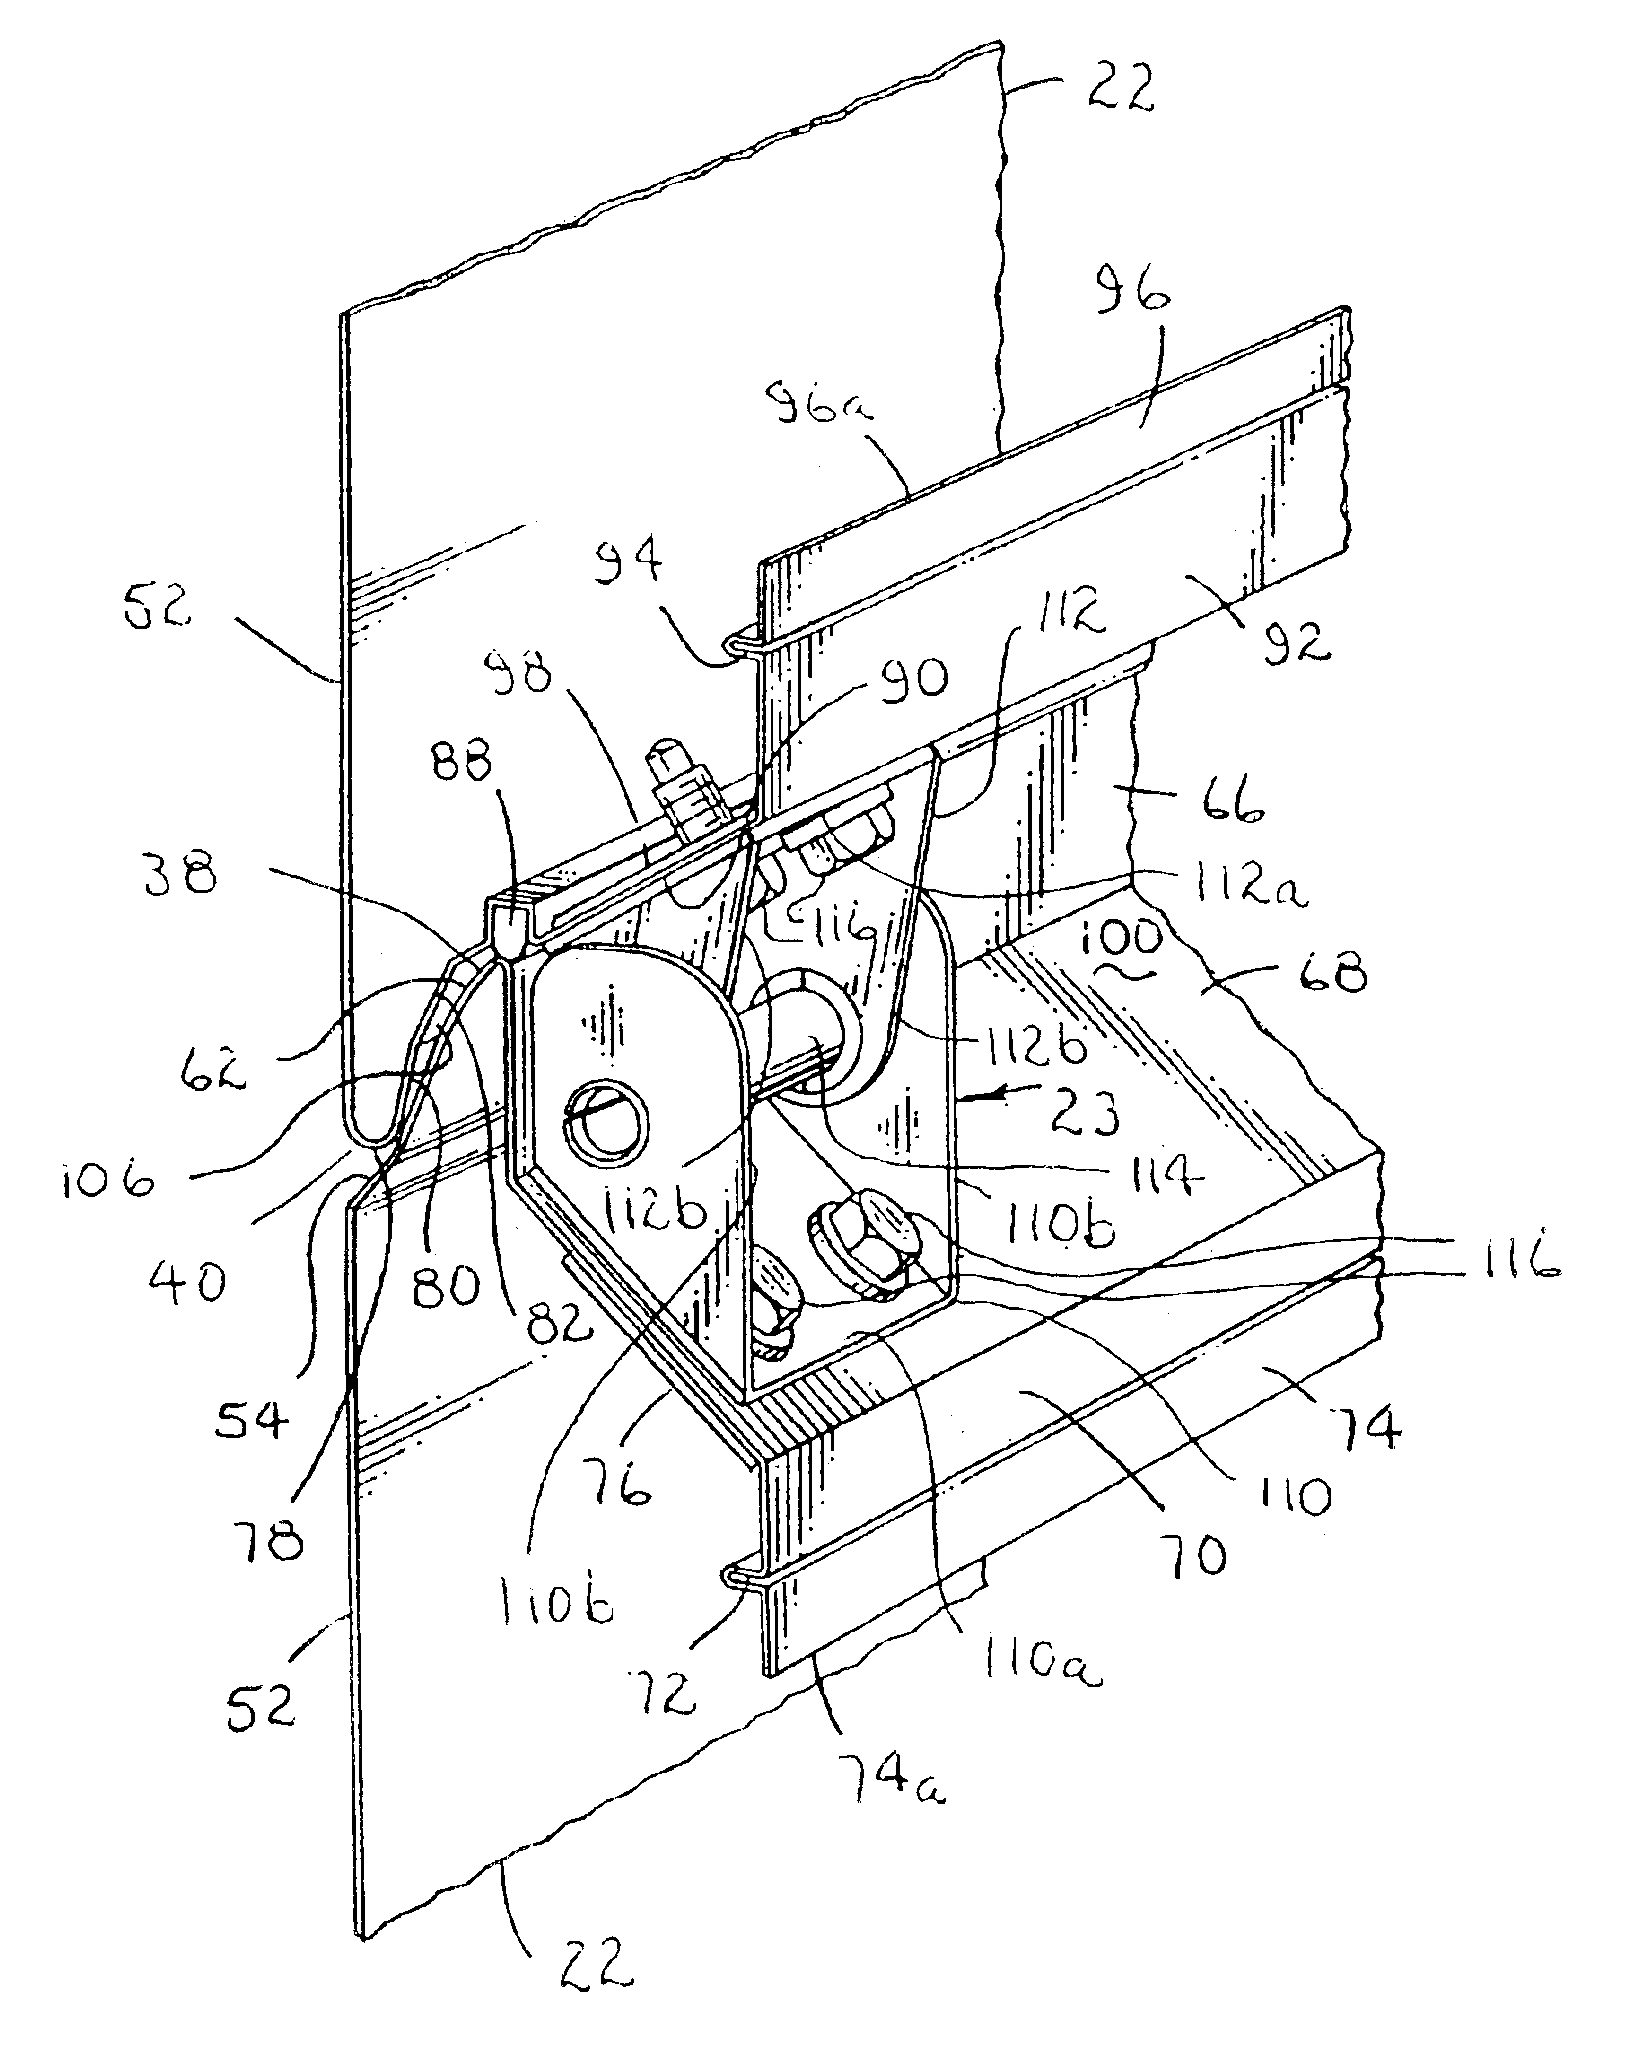 Method of assembly of an upward acting sectional door